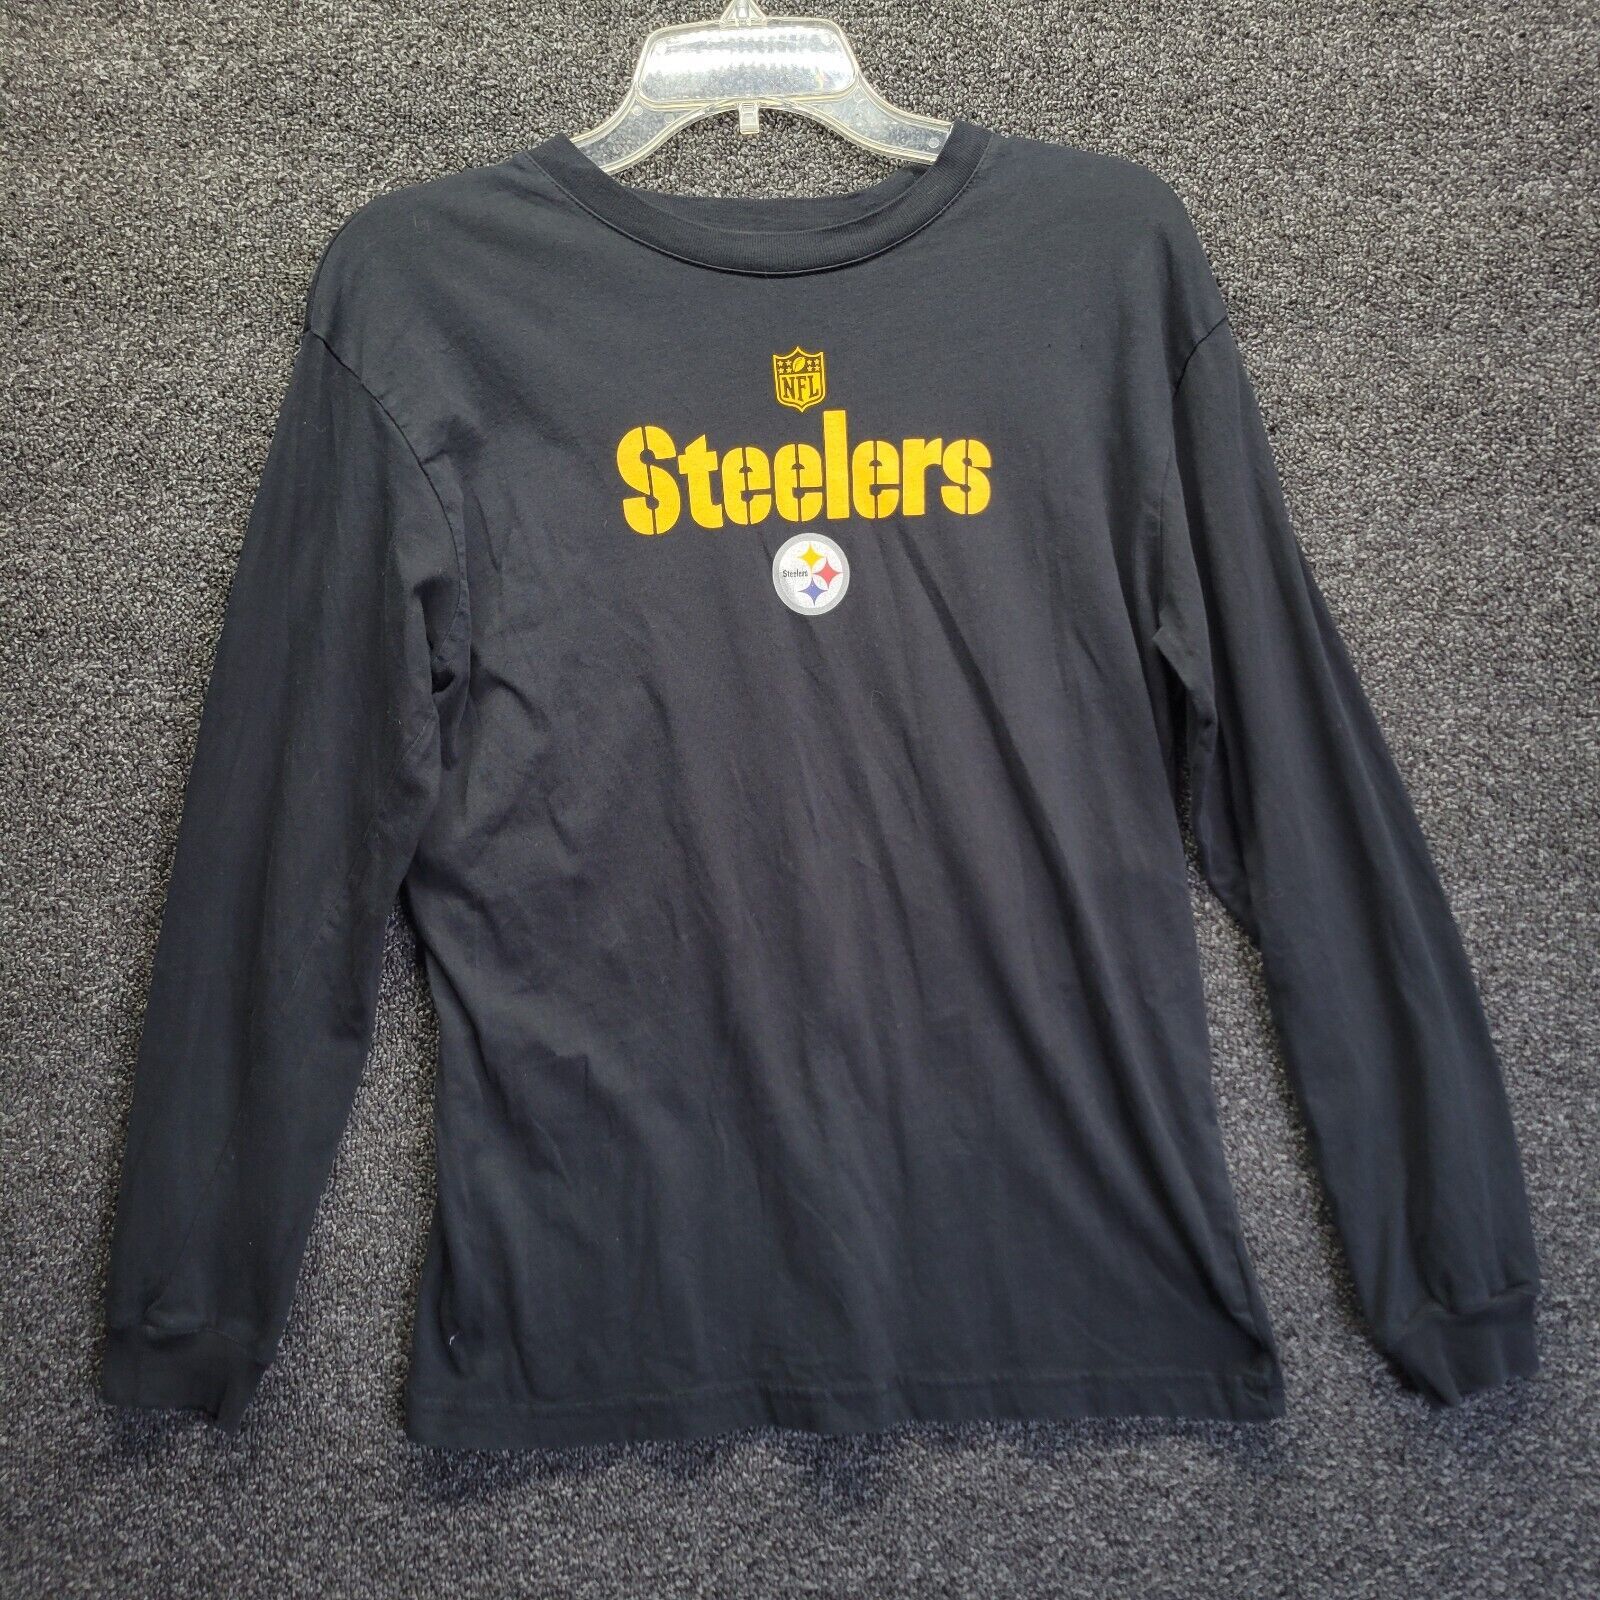 Primary image for PITTSBURGH STEELERS NFL Team Apparel Boy's Black Long-sleeve Shirt Sz L